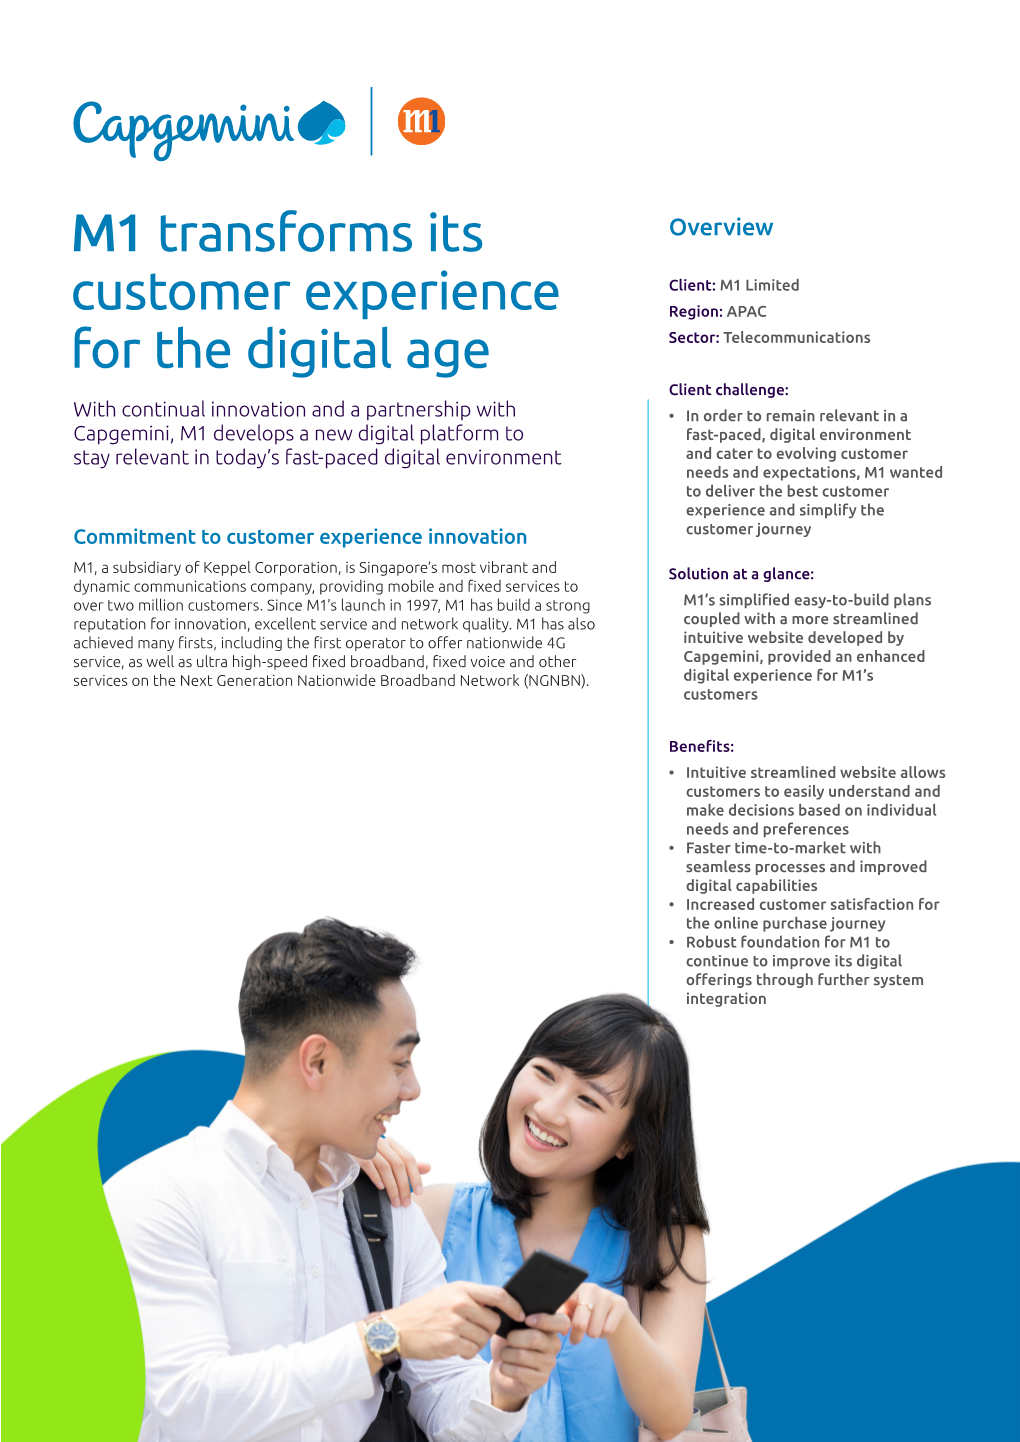 M1 Transforms Its Customer Experience for the Digital